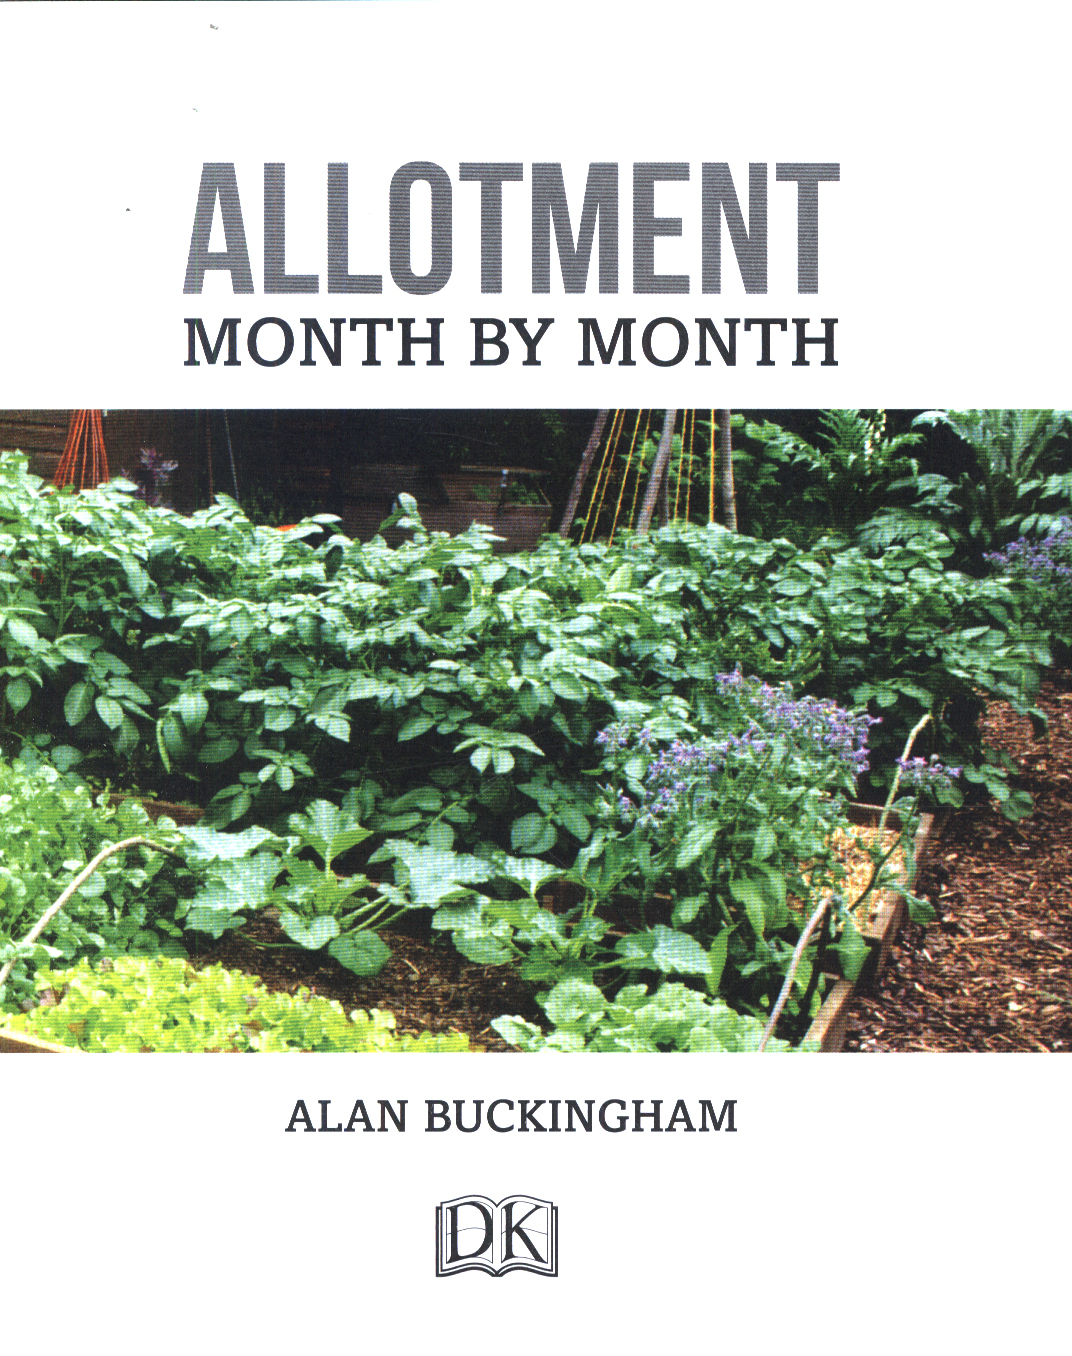 Allotment Month By Month H/B by Alan Buckingham